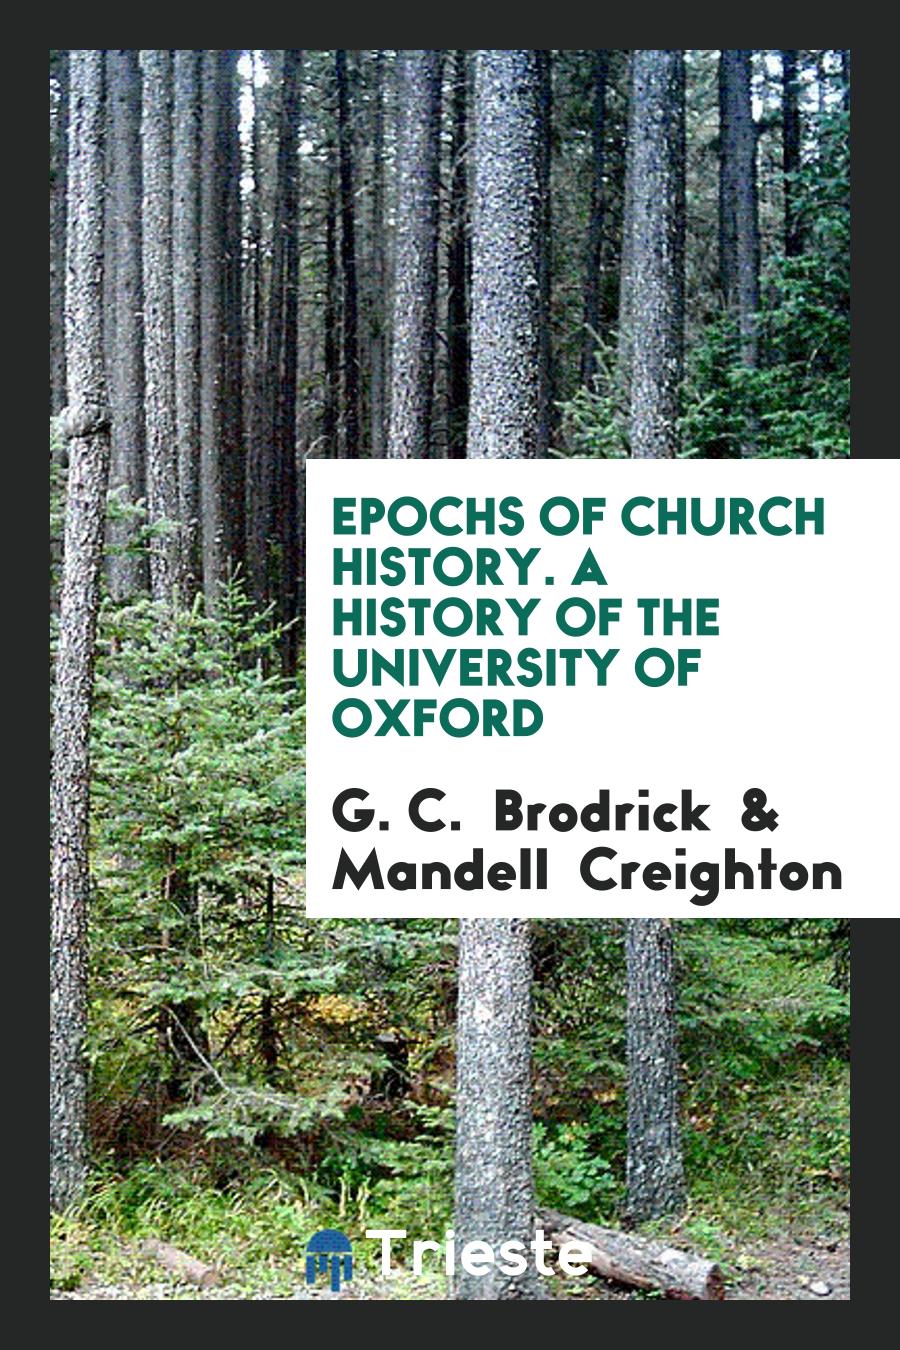 Epochs of Church History. A History of the University of Oxford